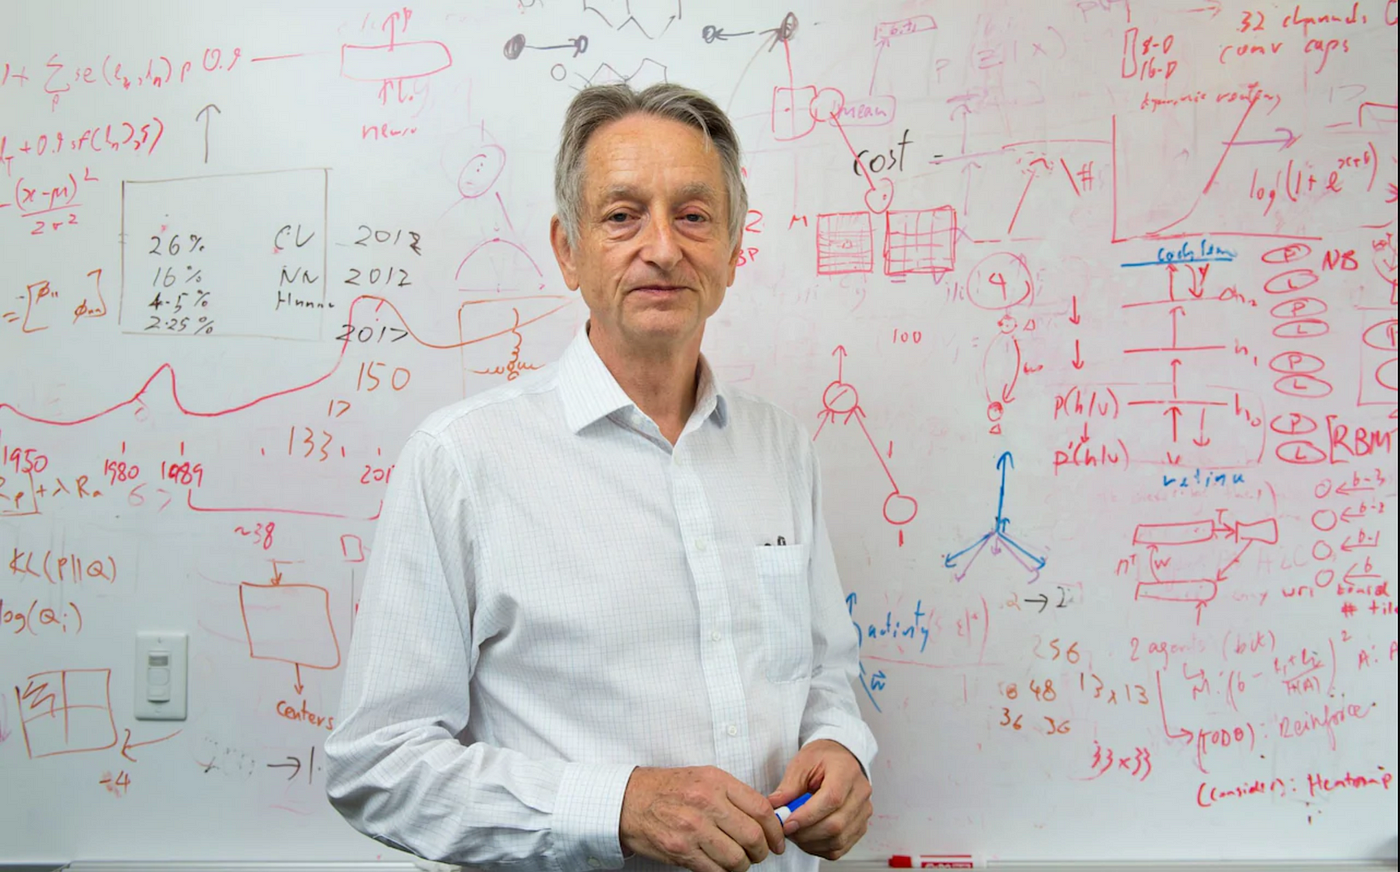 Father of Machine Learning”, the Chief AI Scientist of